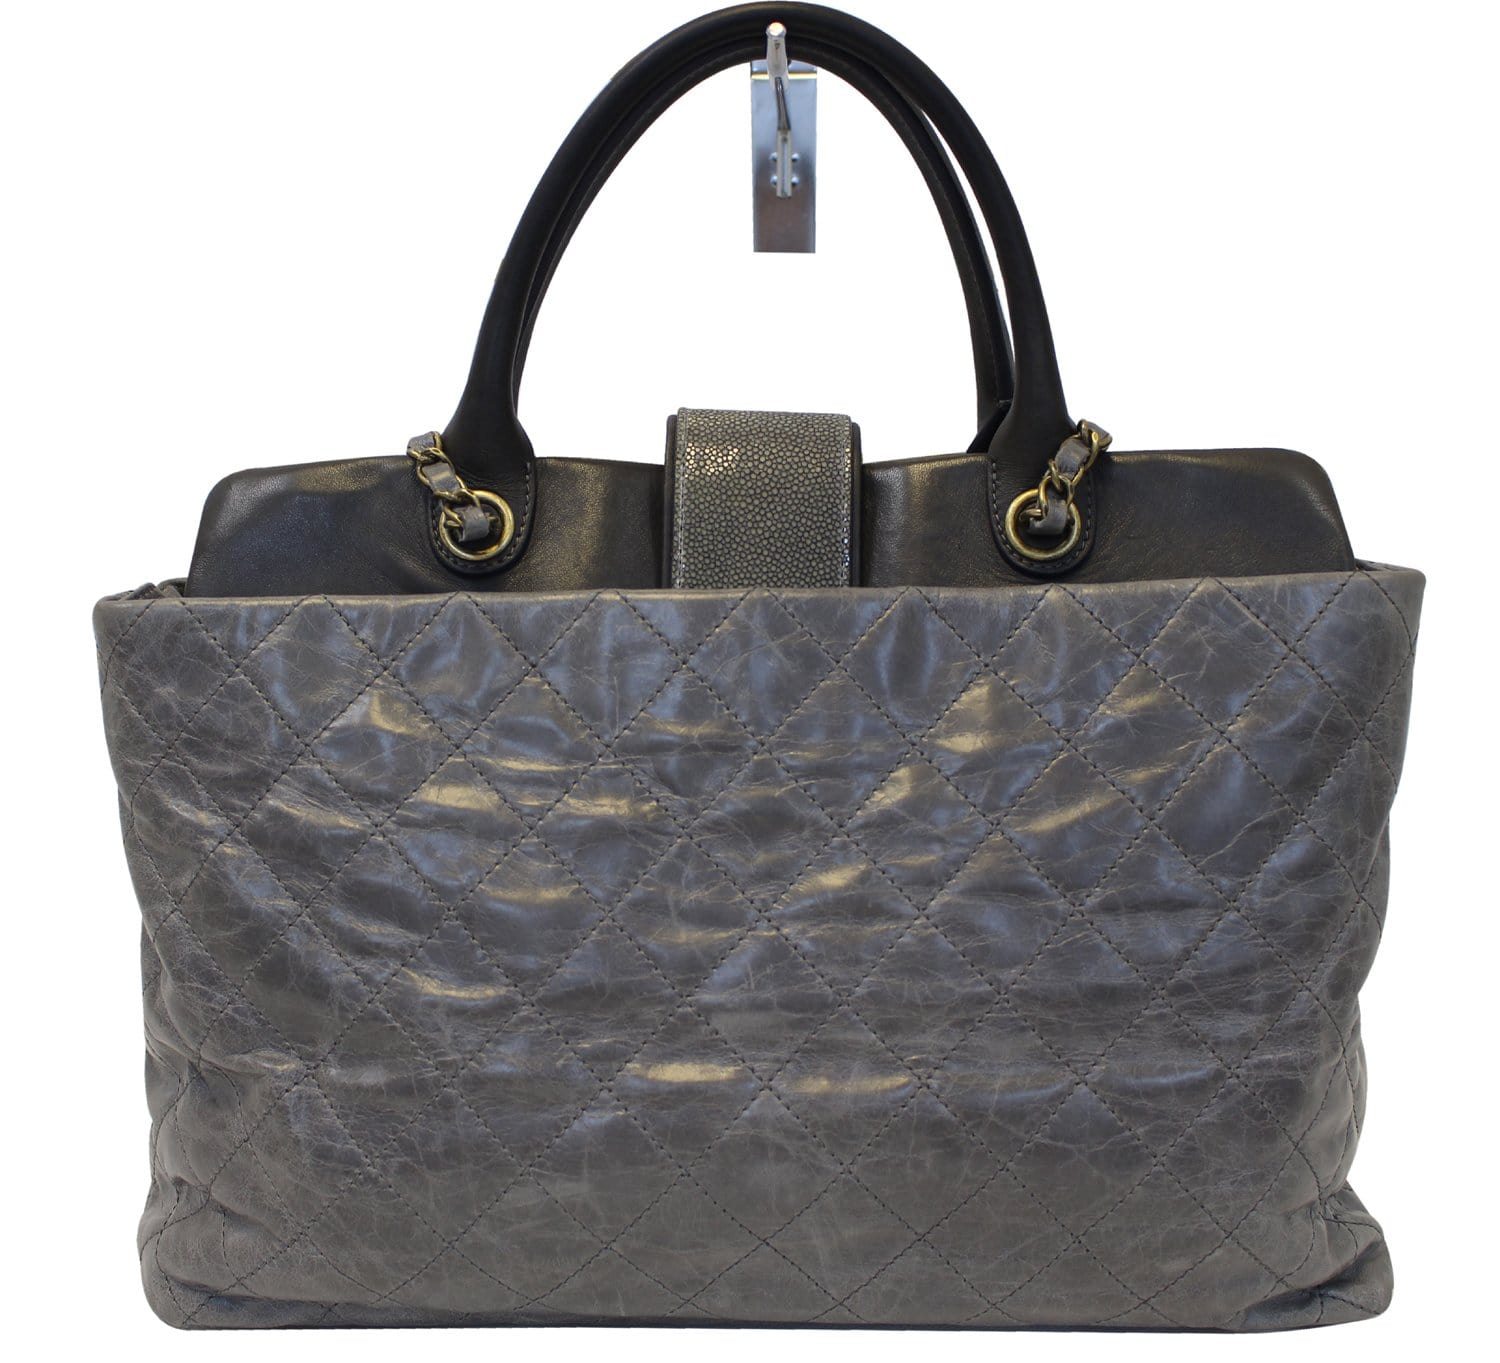 CHANEL Grey Quilted Calfskin Leather Stingray Bindi CC Shopper Tote Ba